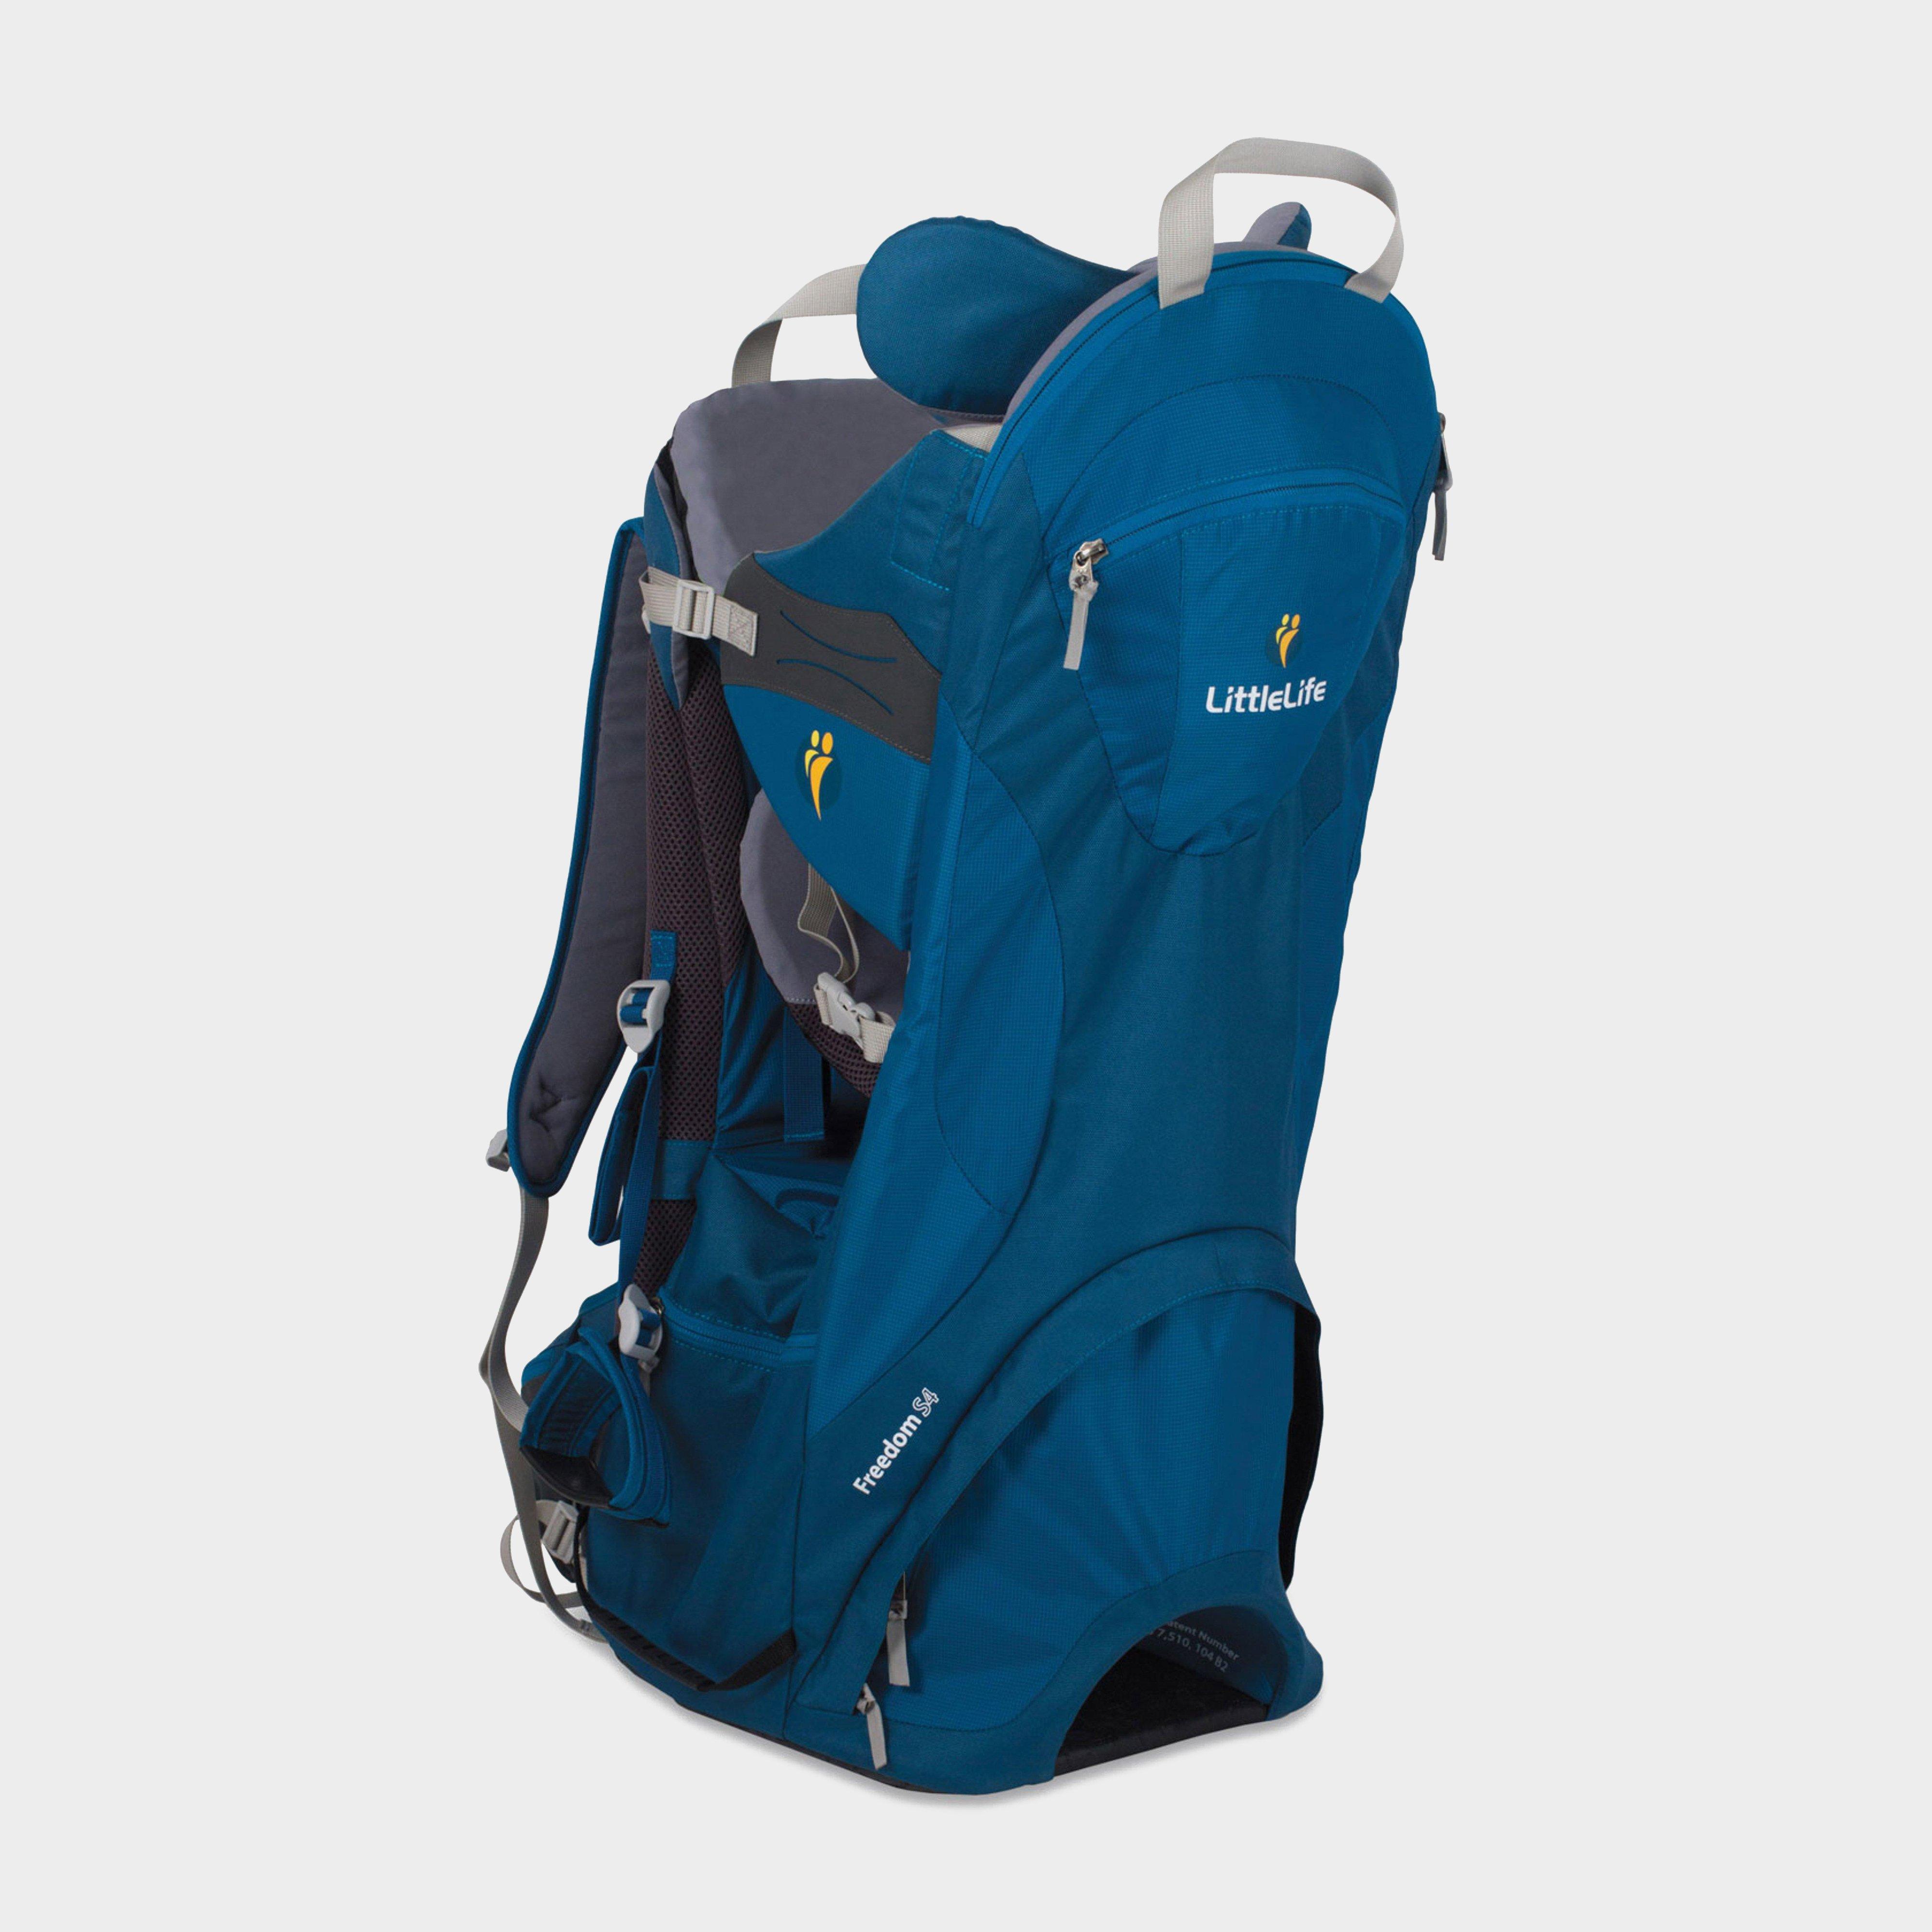 baby carrier backpack go outdoors